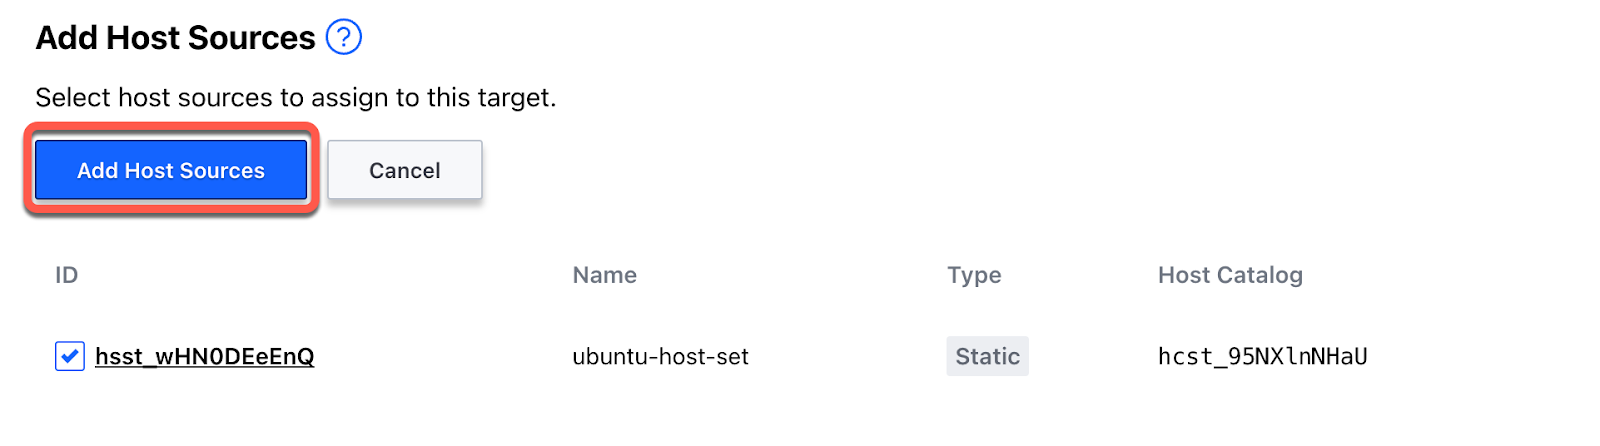 Add host sources